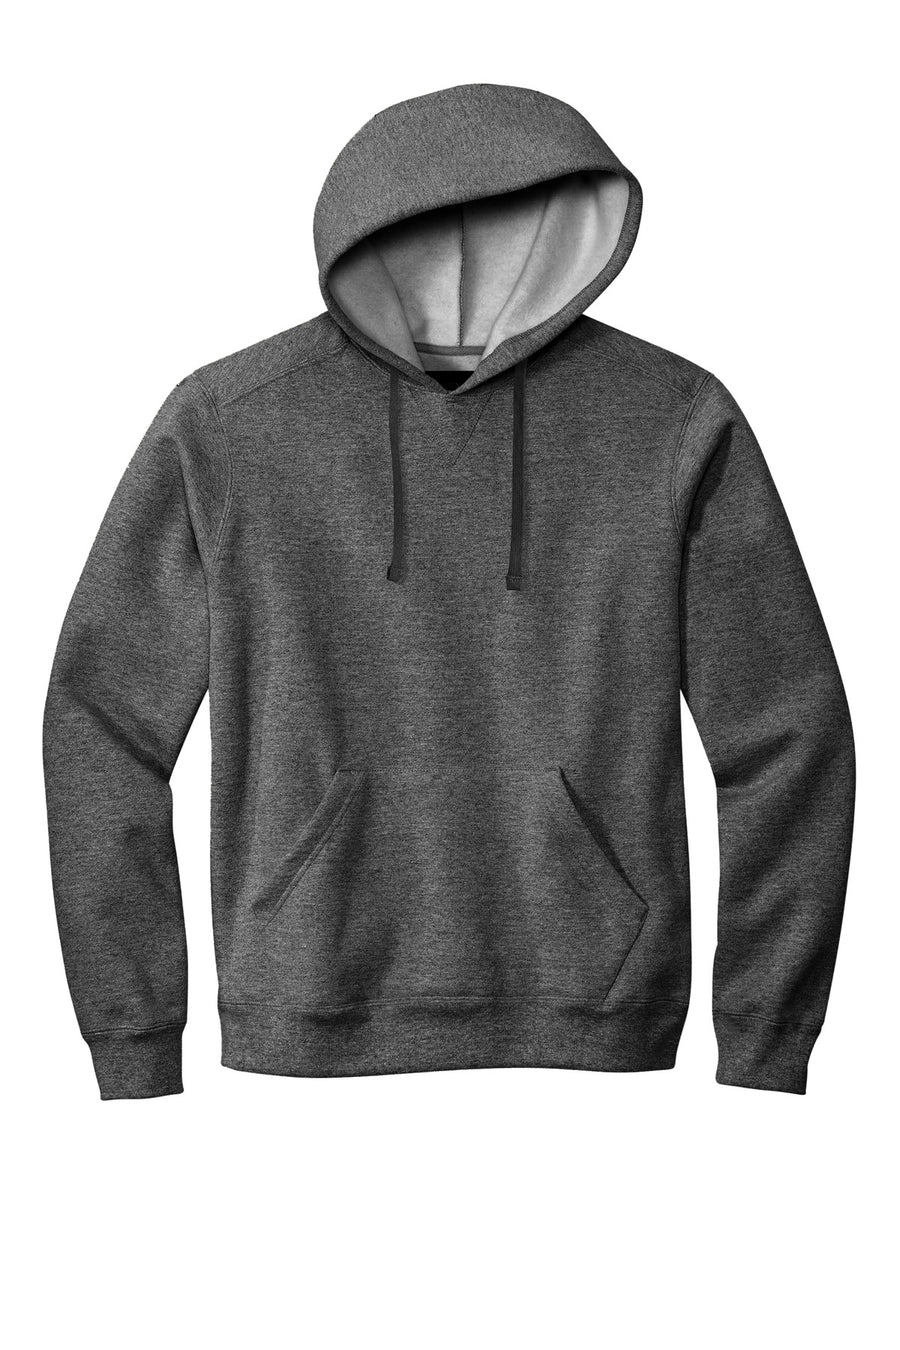 VL130H-Charcoal Heather -front_model